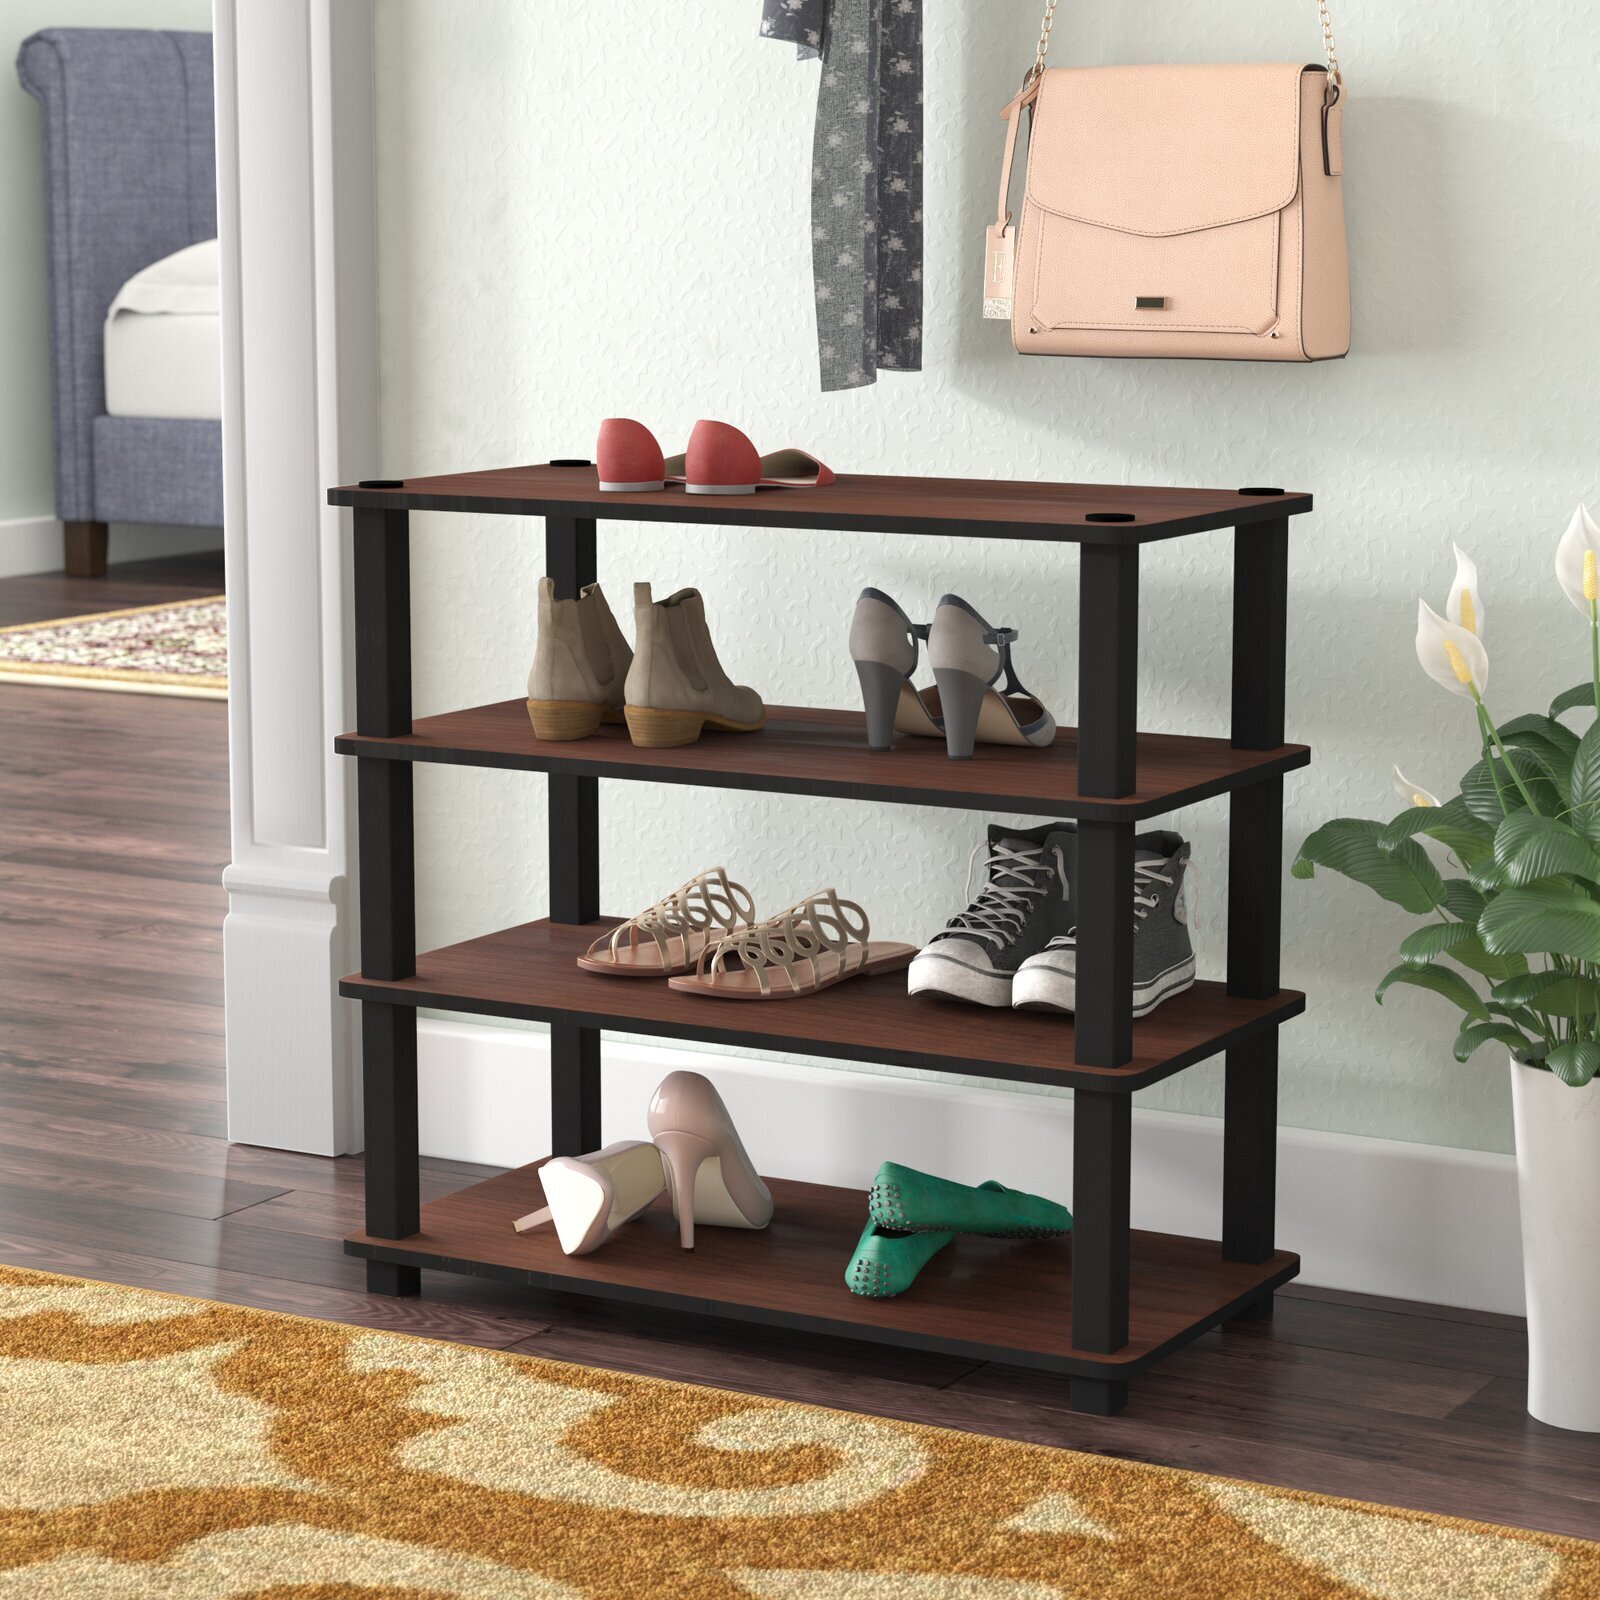 Cherry wood shoe rack in two finishes